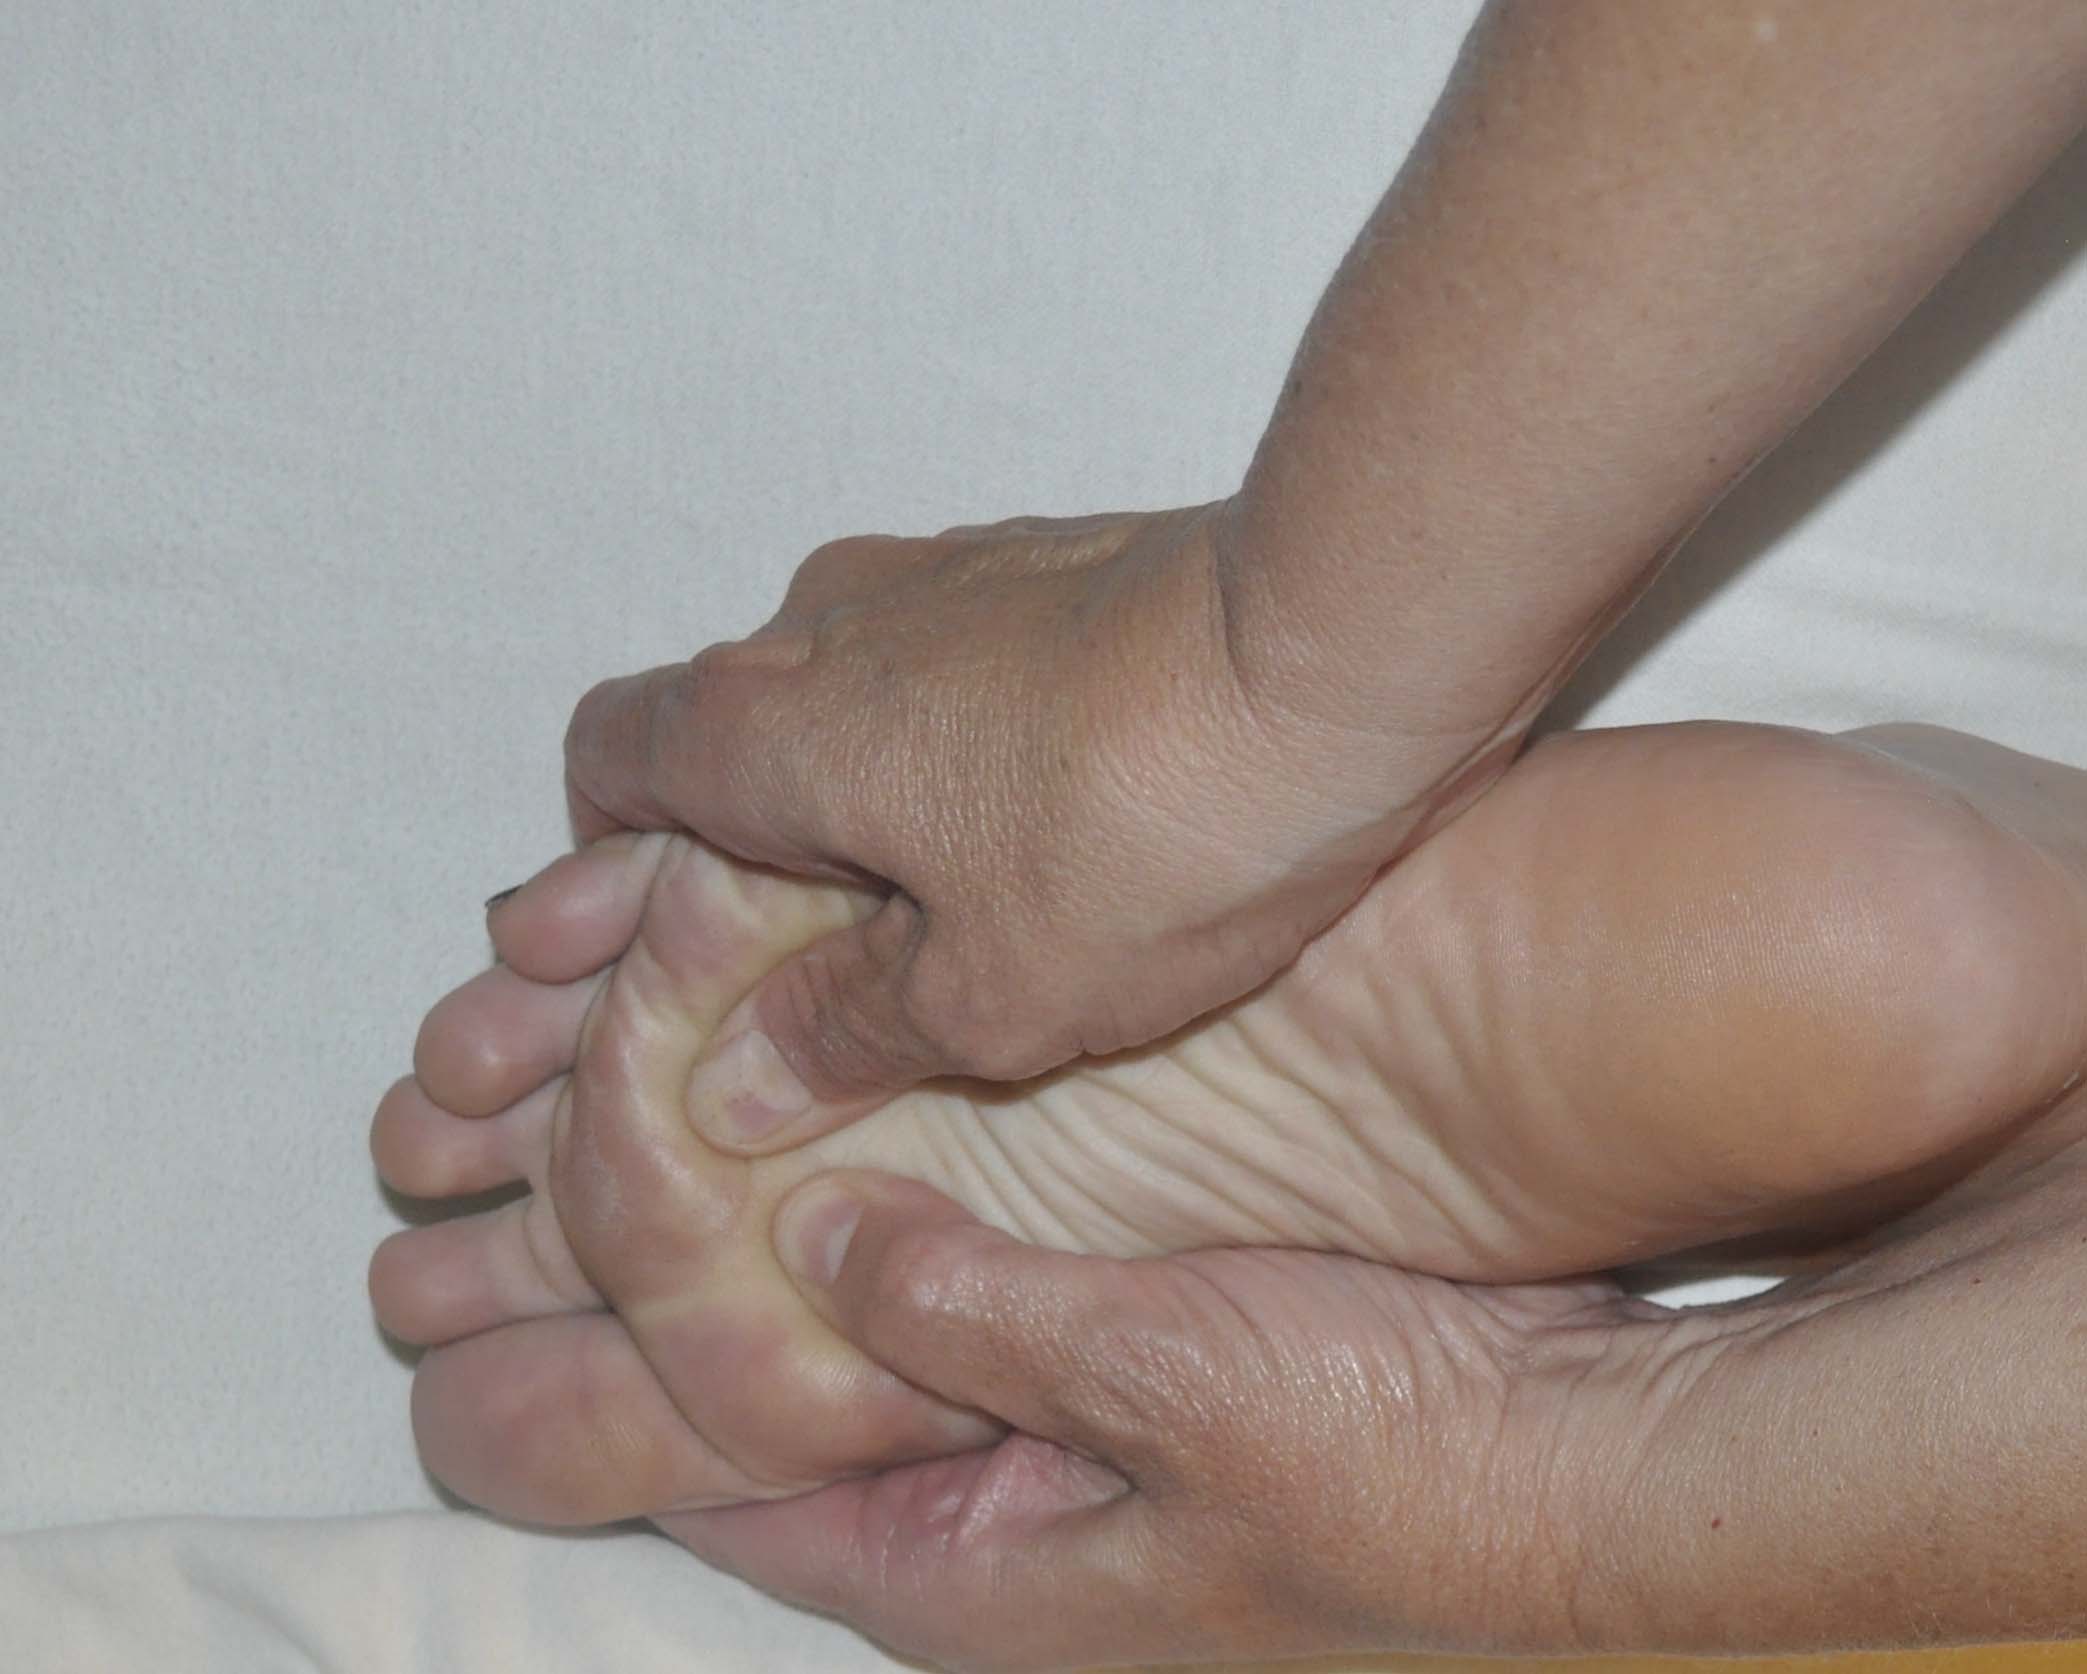 Best video for learning foot massage at home!